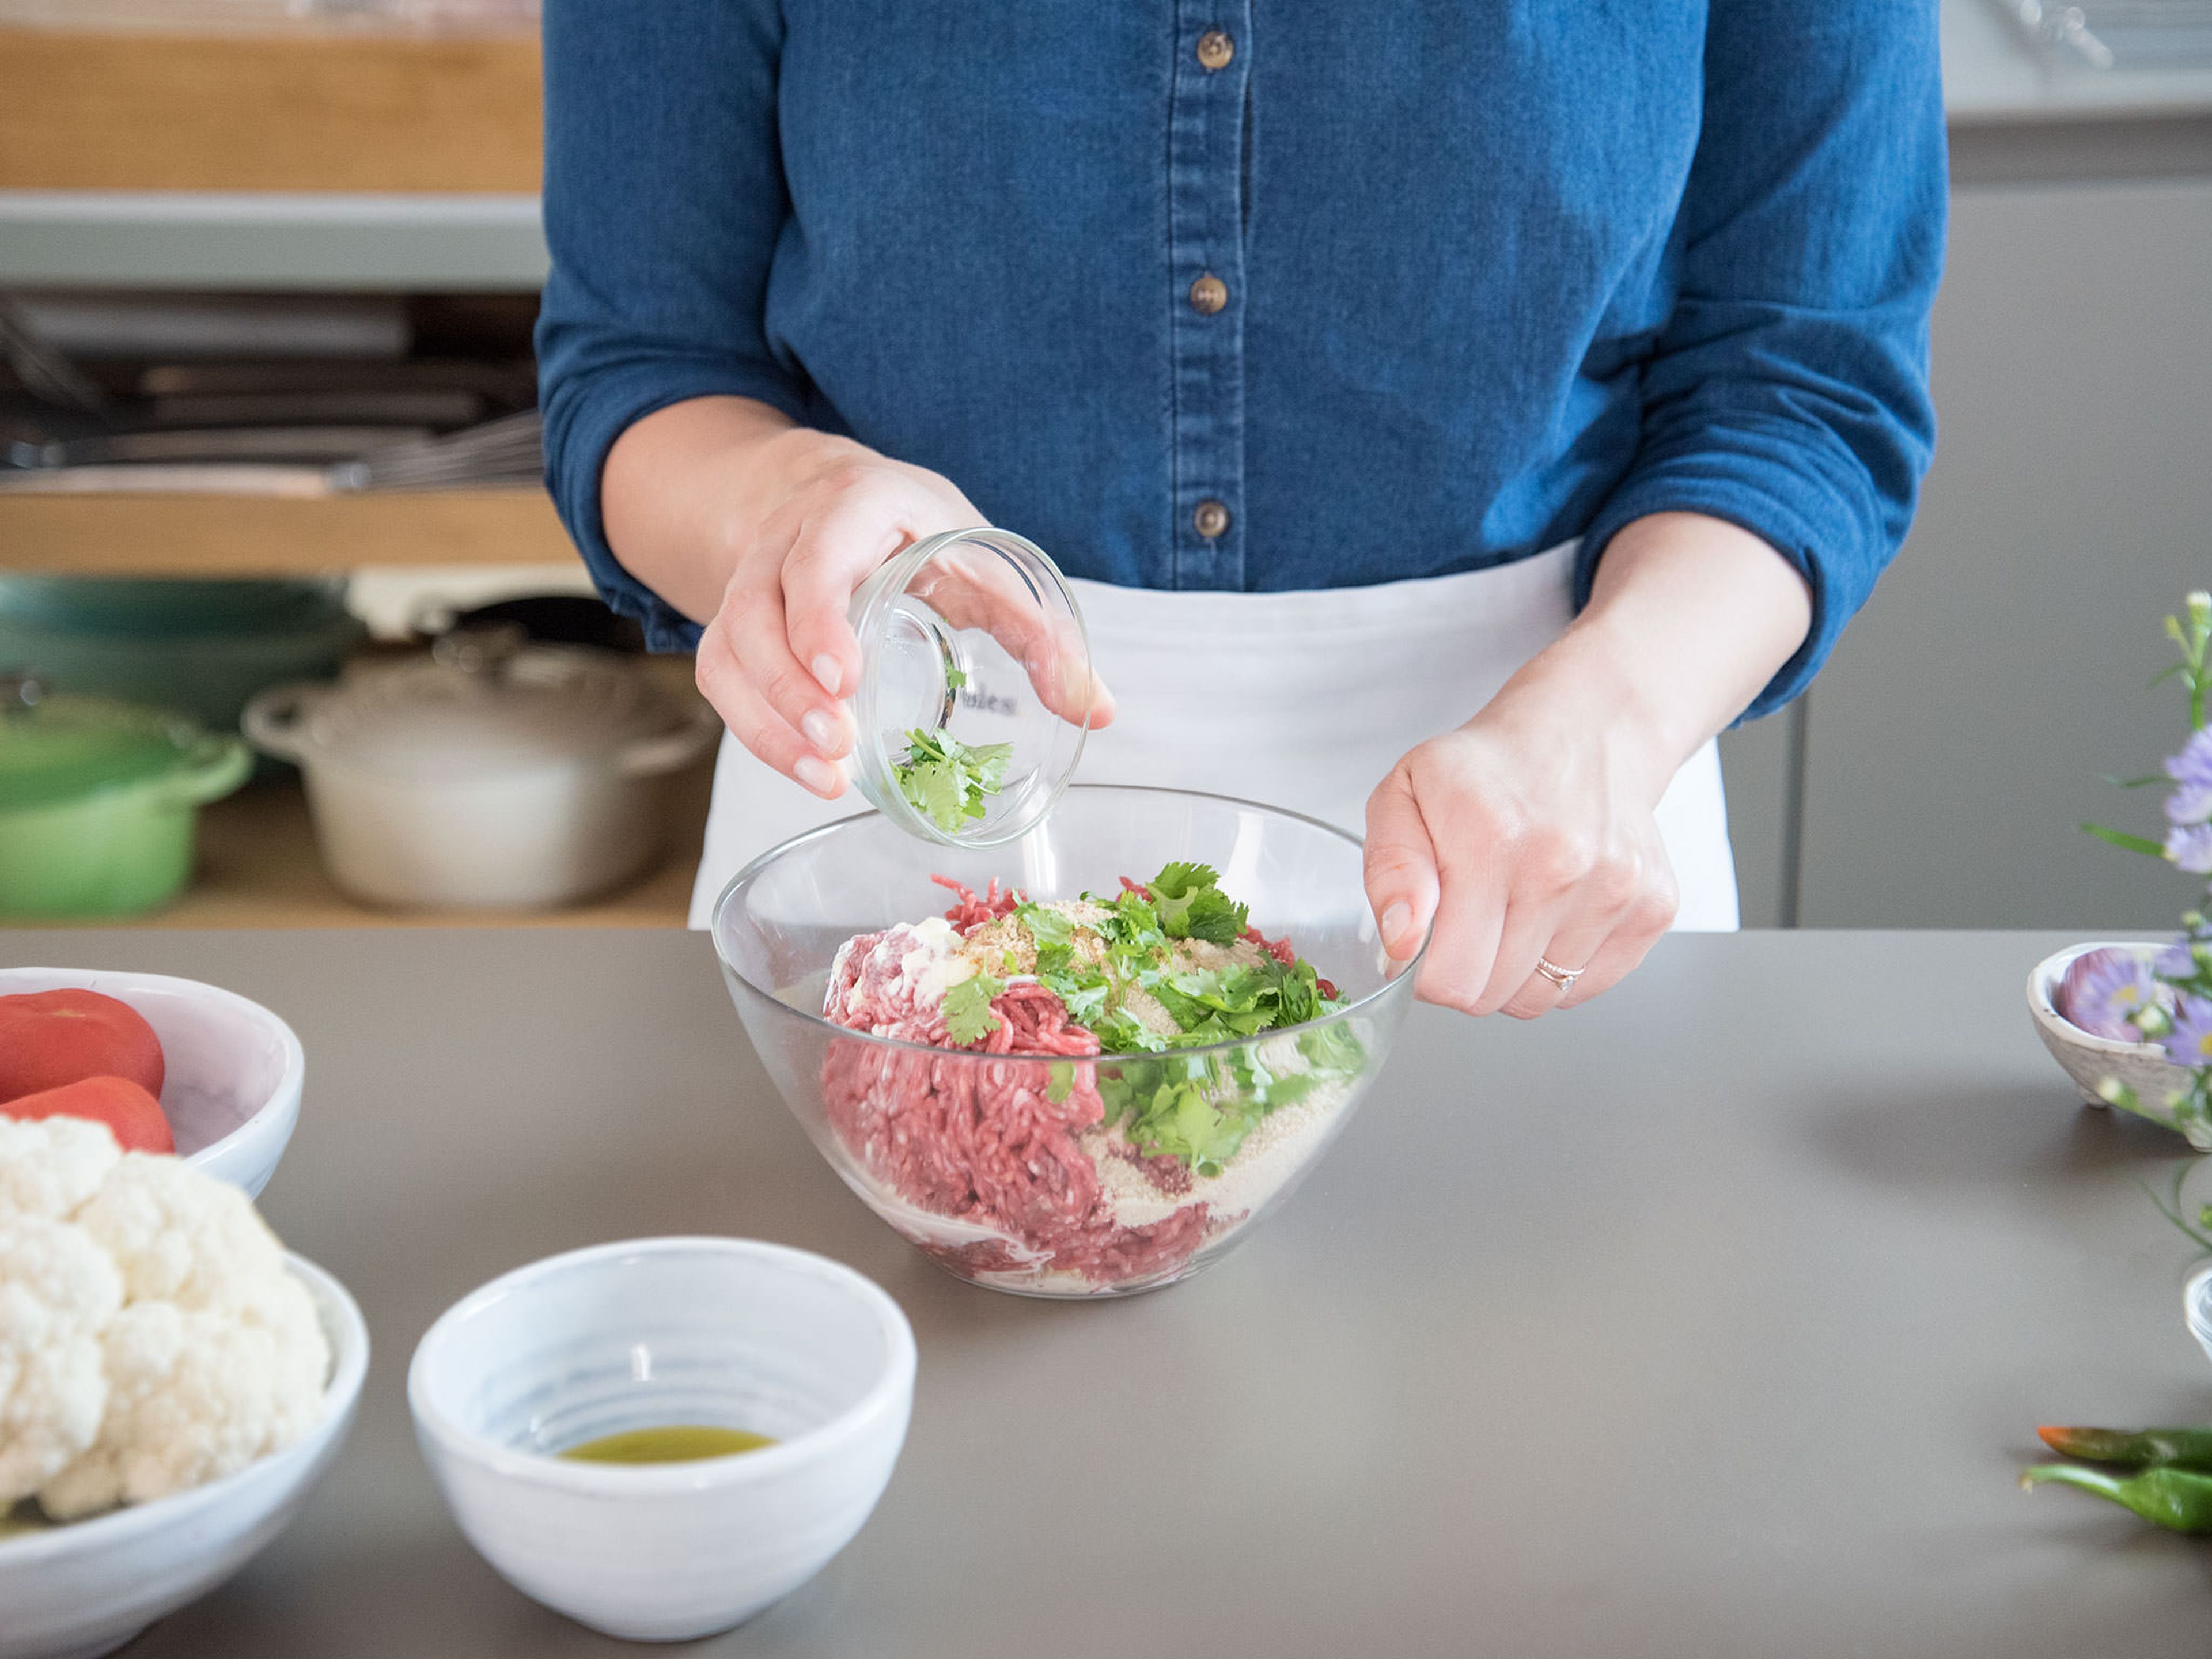 In the meantime, in a large bowl, mix ground meat with breadcrumbs, cilantro, heavy cream, Asian spice mix, and salt. Form 8 equal-sized meat rolls from the mixture and brush with some olive oil. Cover with plastic wrap. Let rest for approx. 30 min. in the fridge.